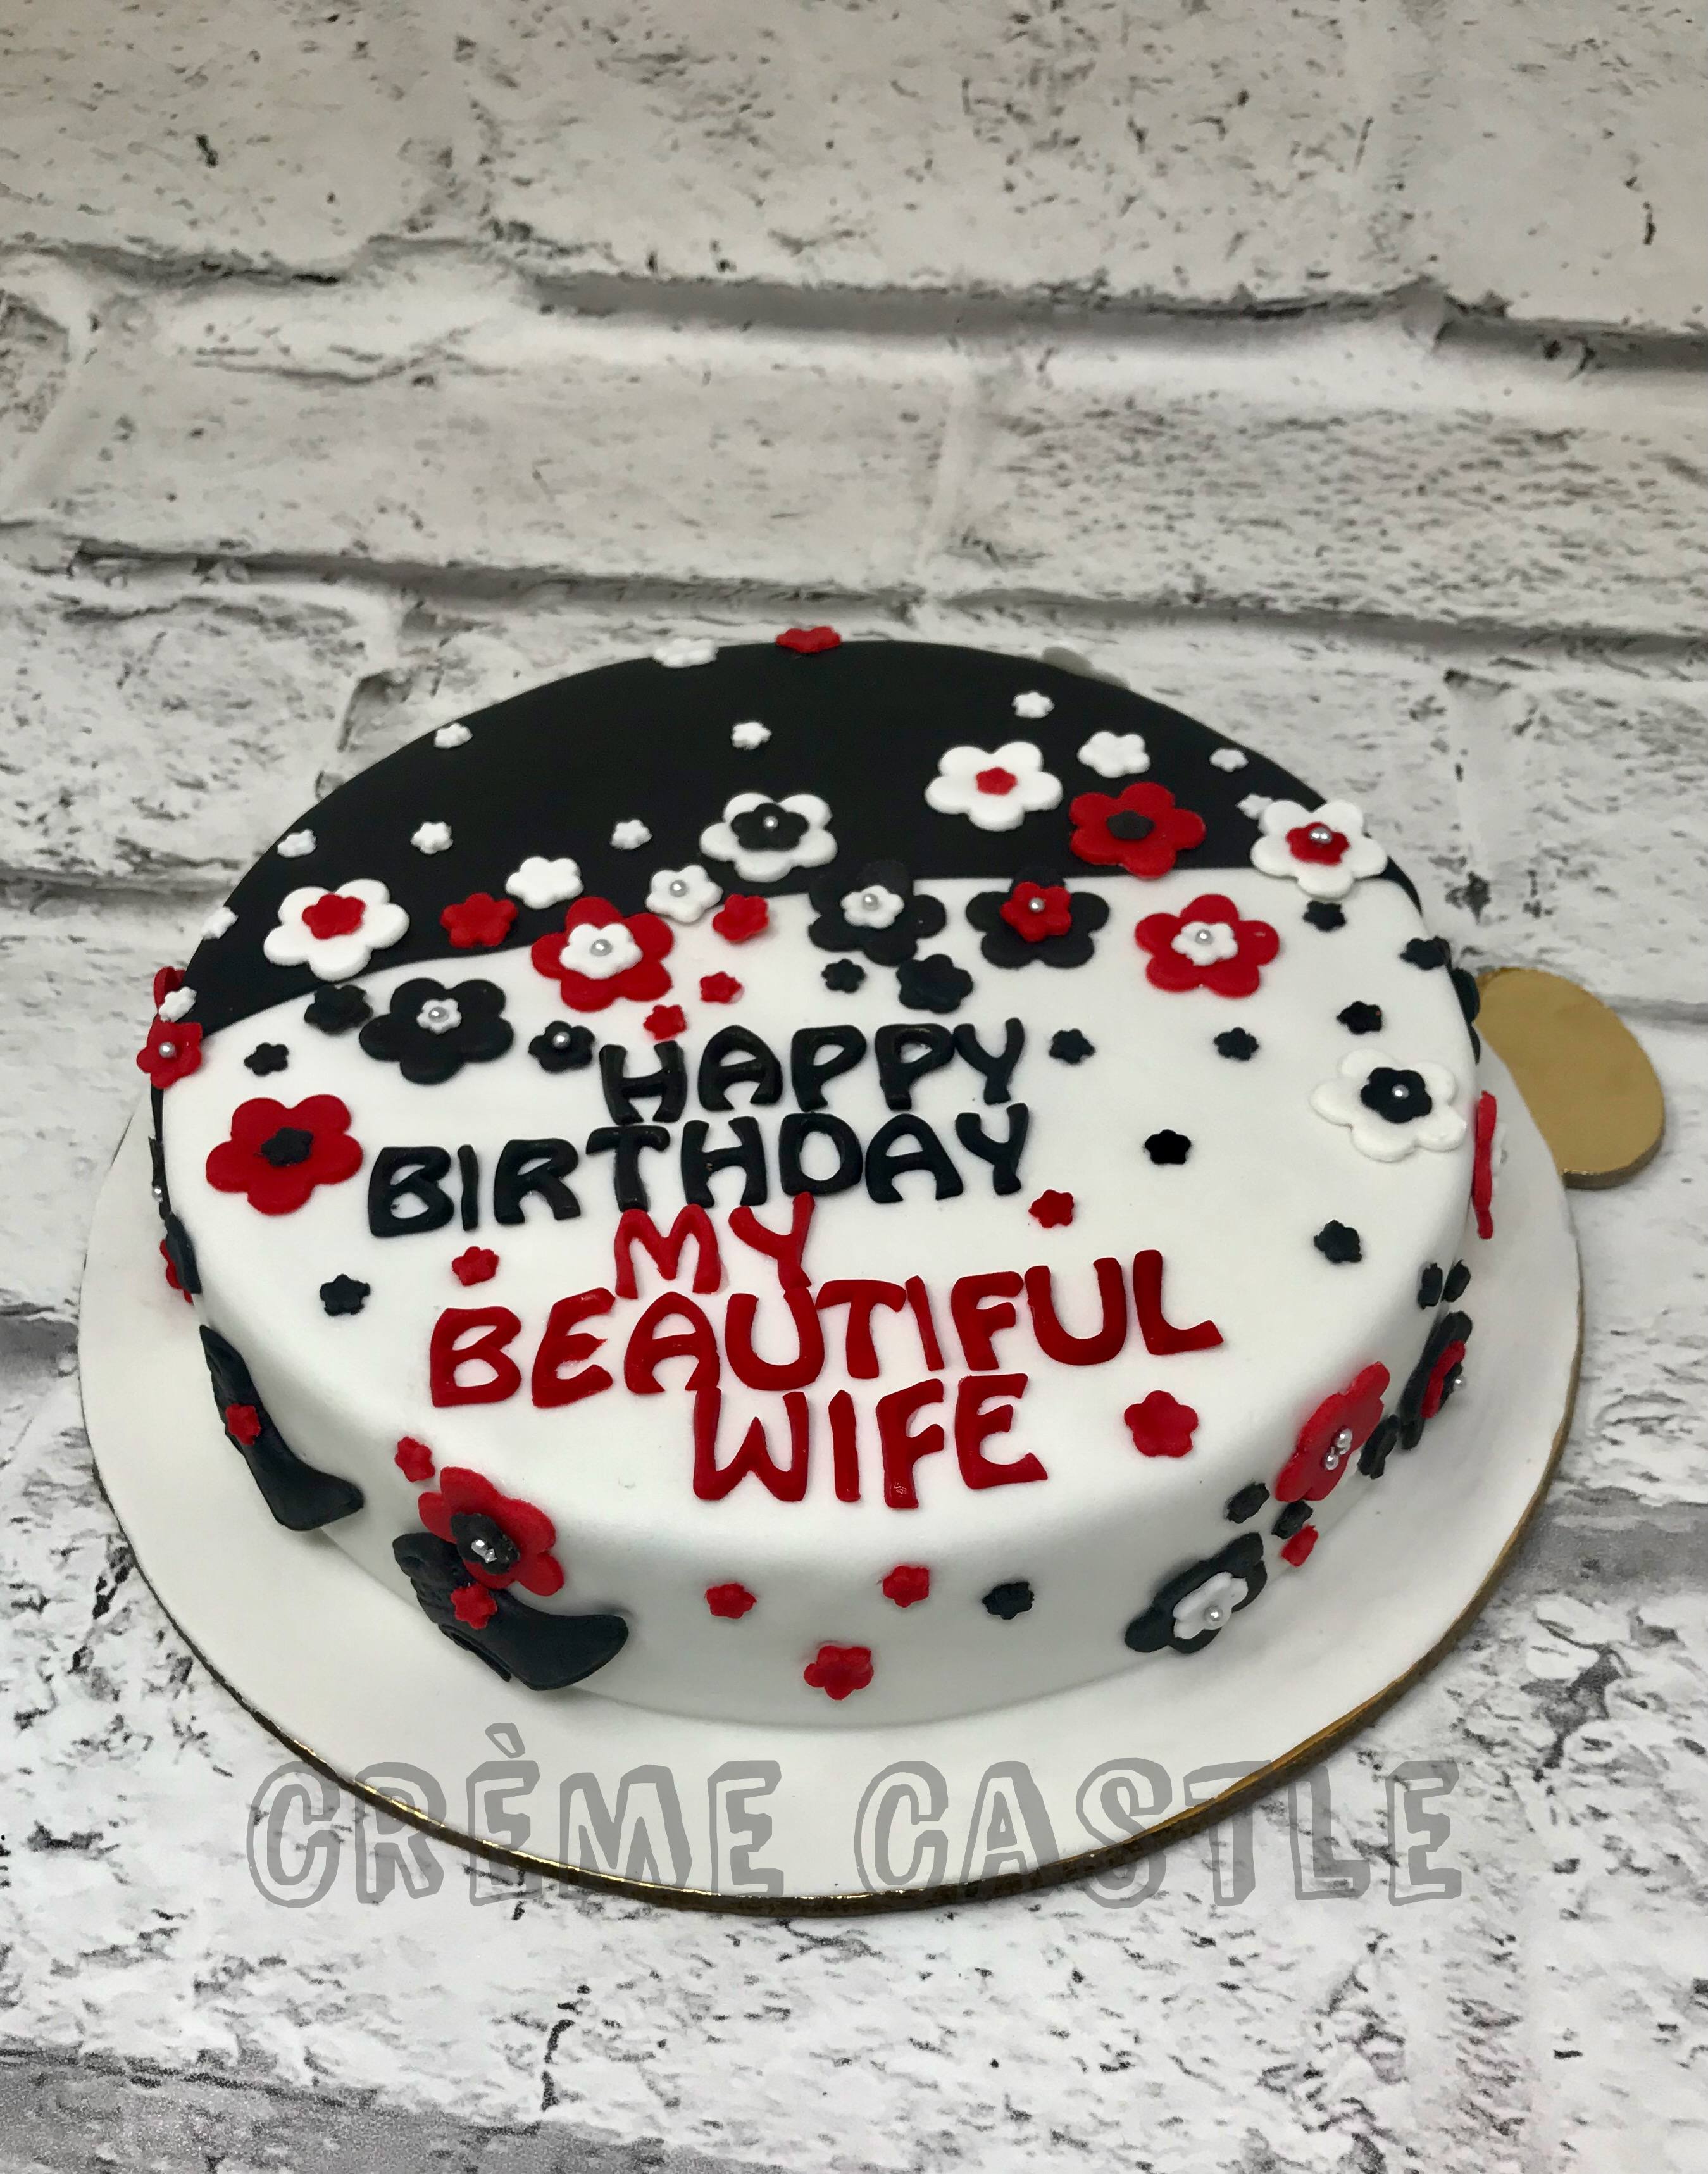 Romantic Wife Birthday Cake With Name & Photo | Birthday cake for wife,  Birthday wishes cake, Happy birthday cake pictures